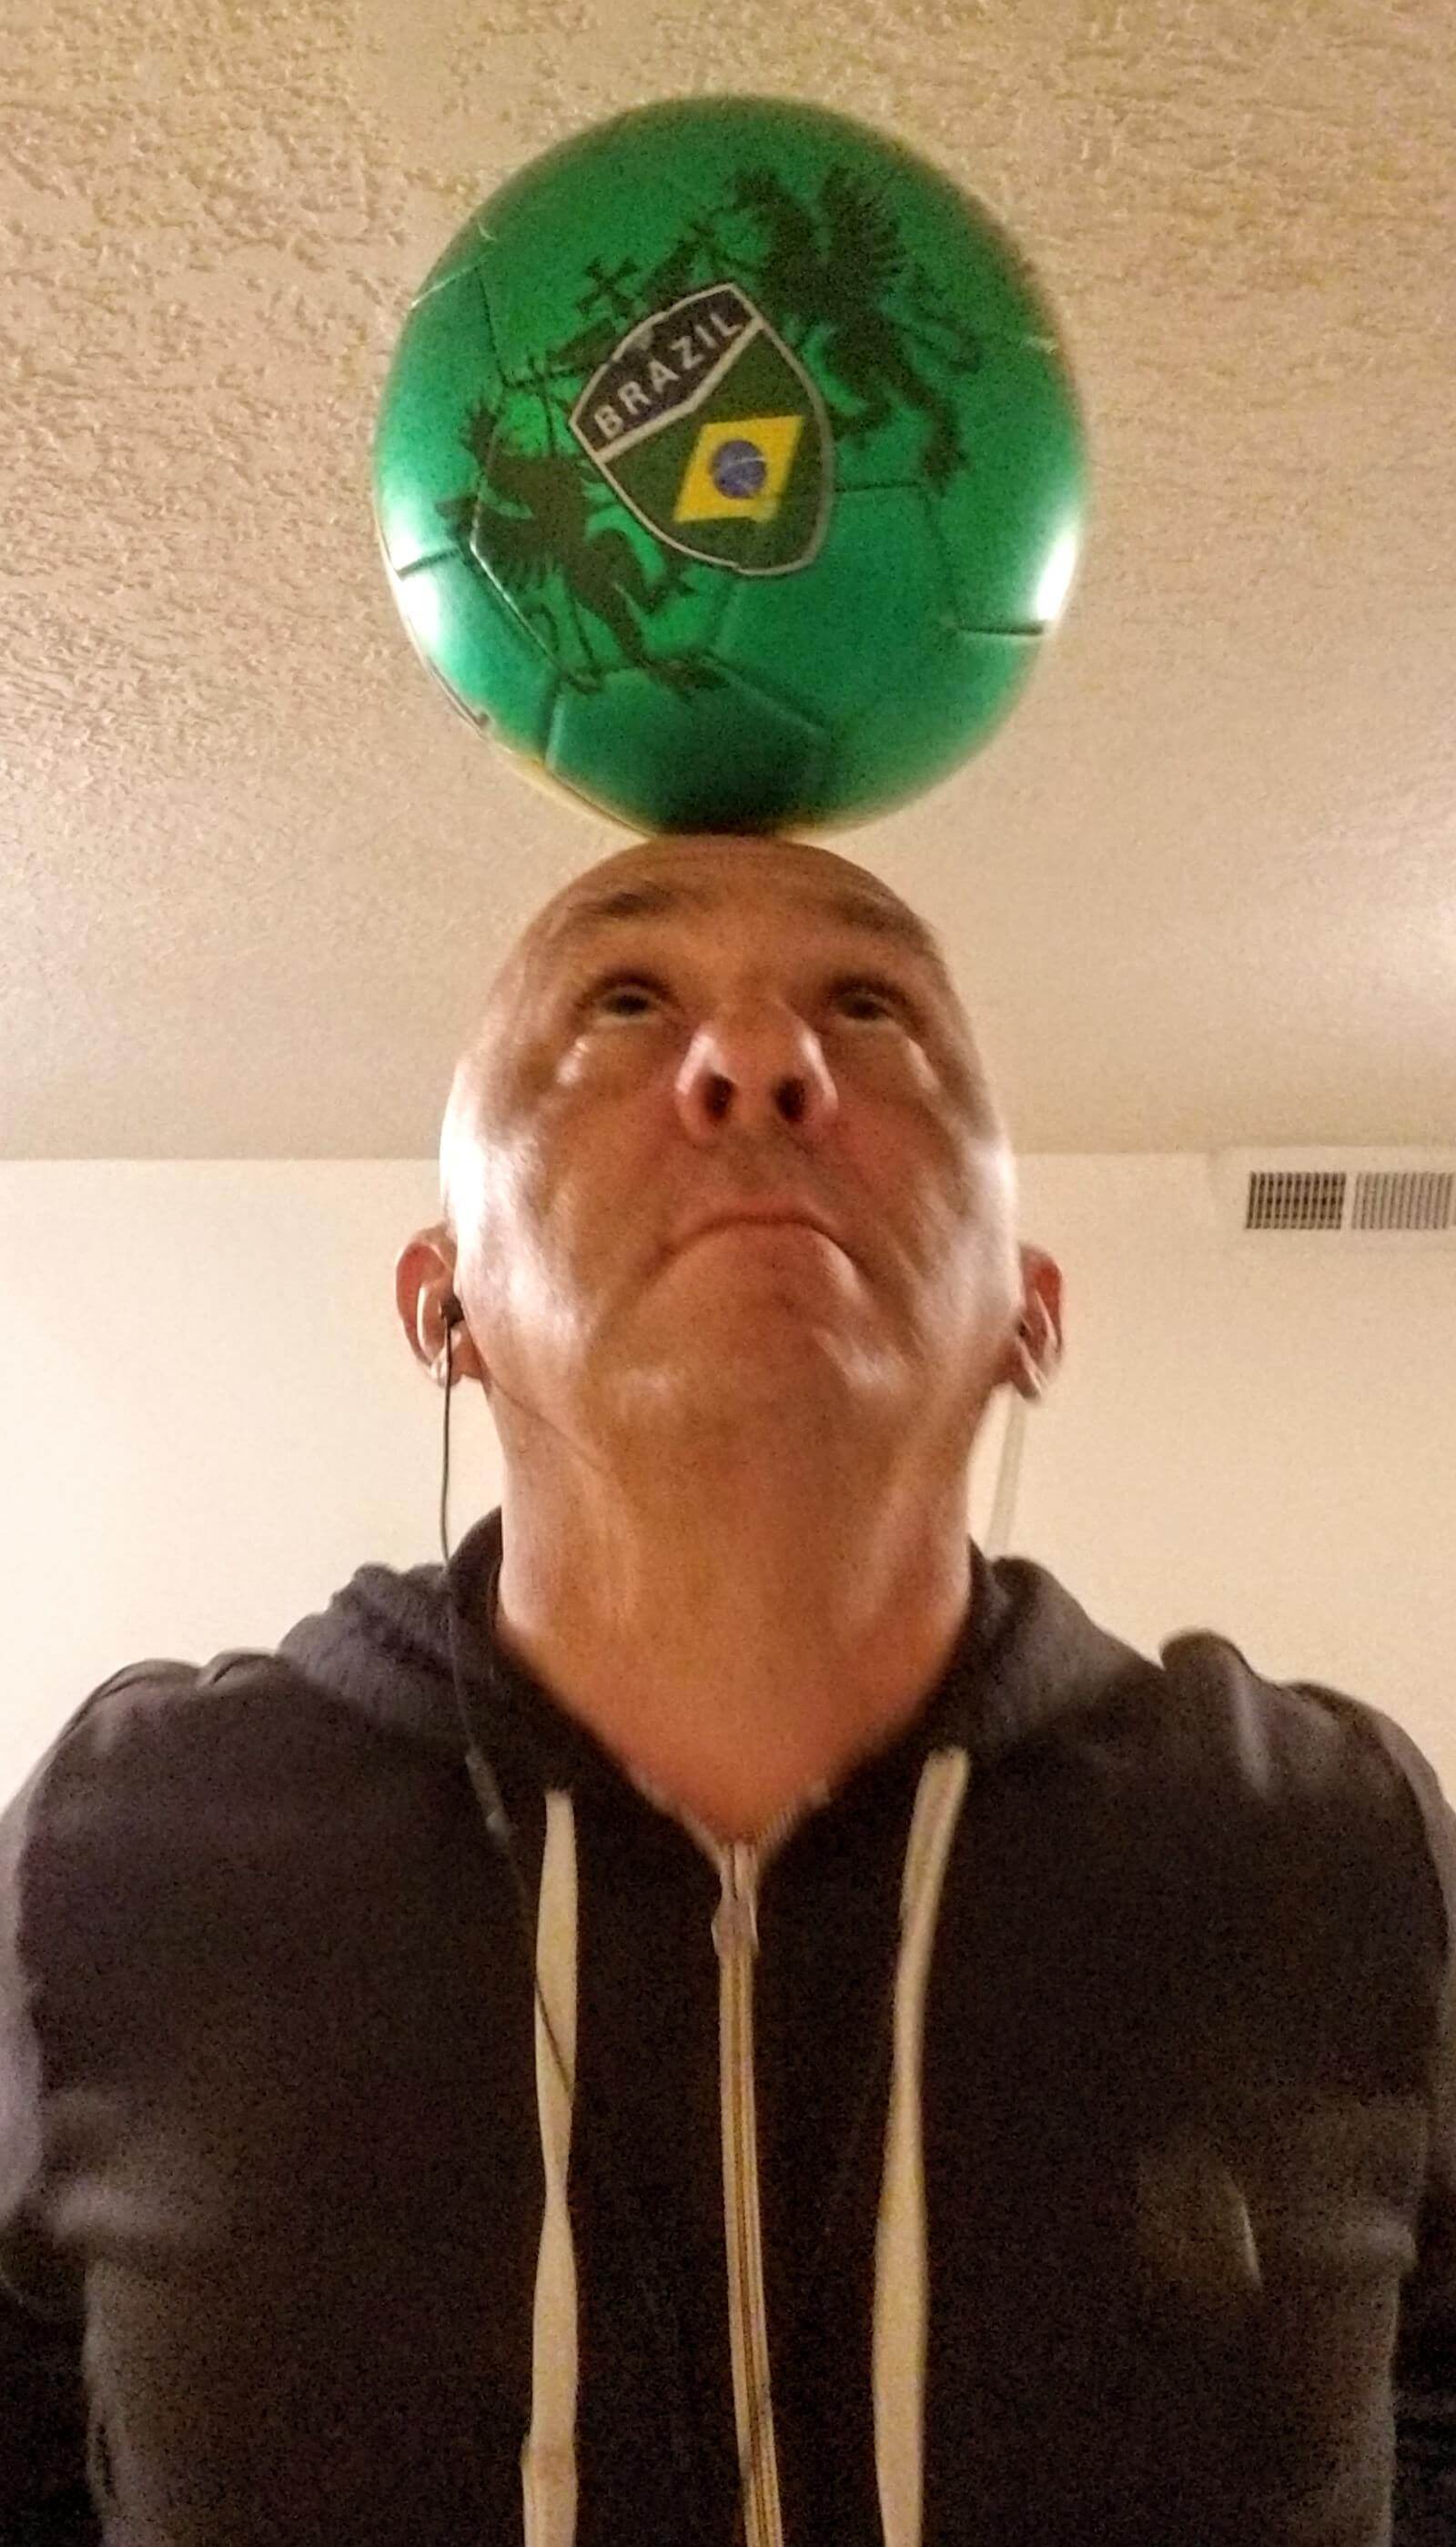 Man with a soccer ball on his head